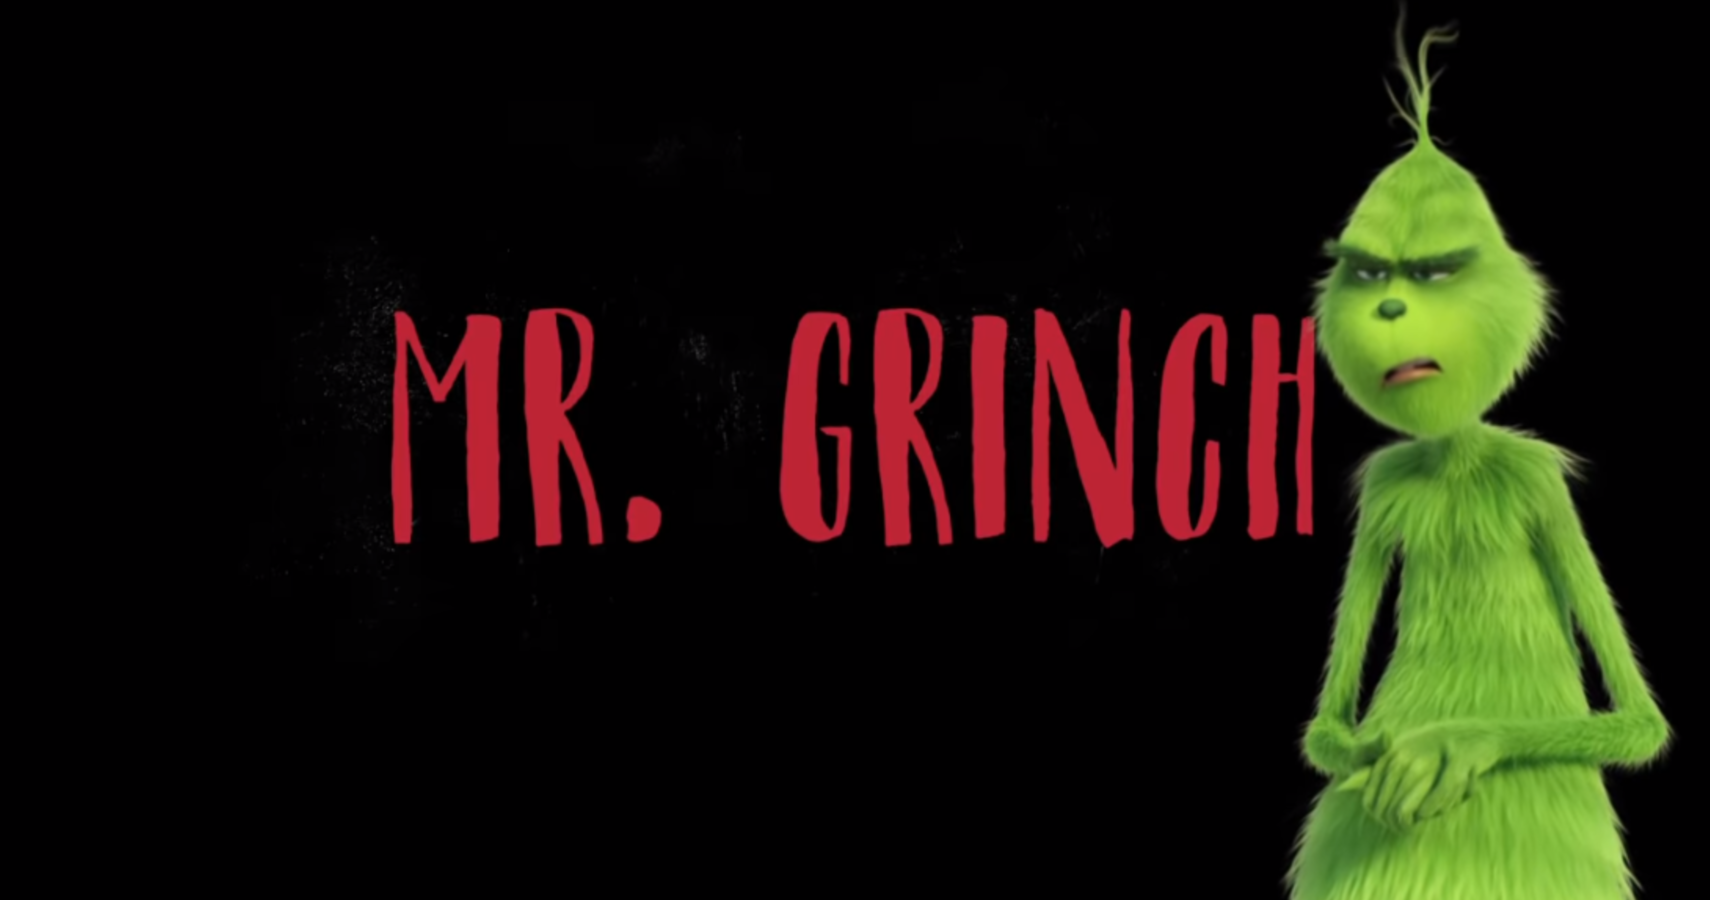 the-song-for-the-new-grinch-movie-is-really-really-catchy